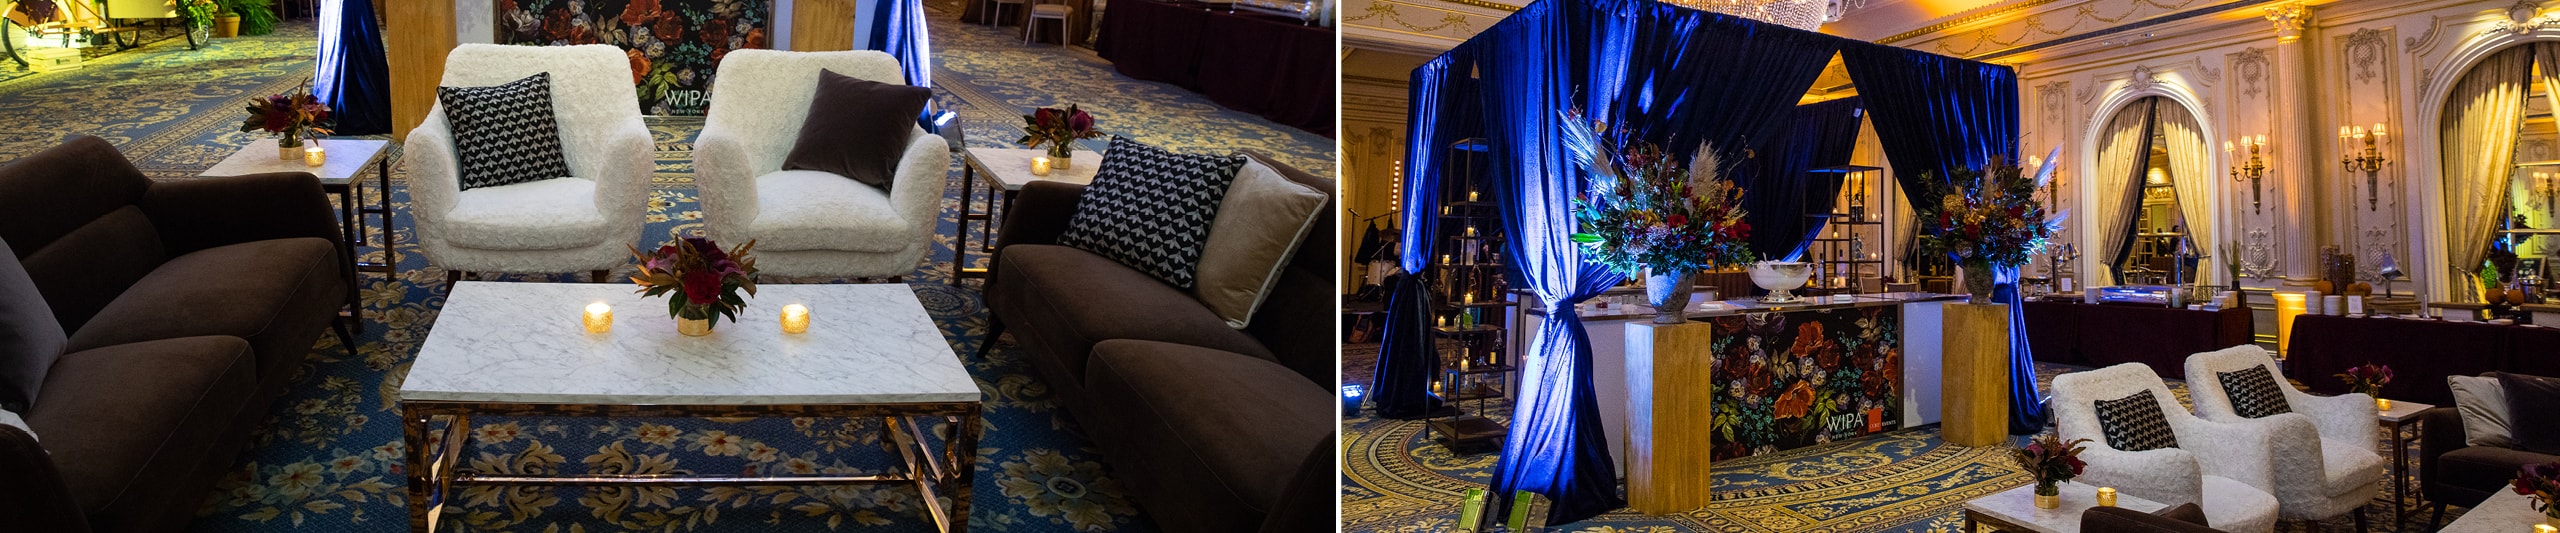 event in elegant ballroom featuring bar area with blue drape and lounge with brown and white seating